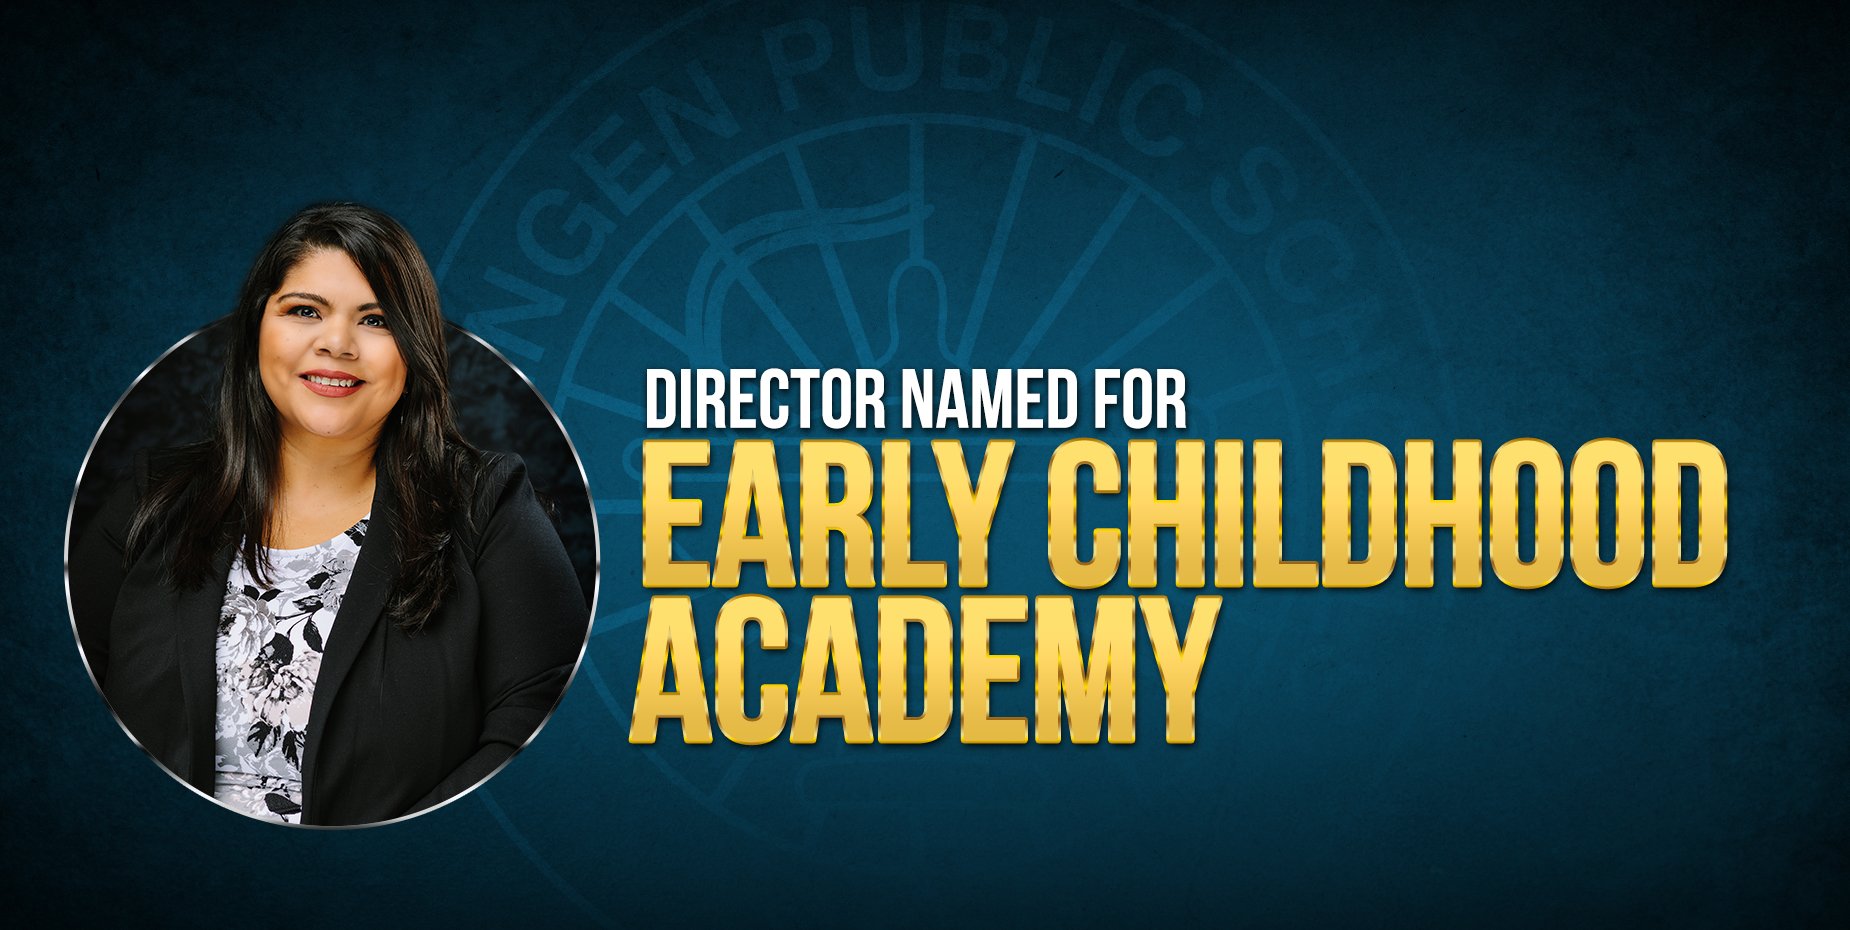 Director named for Early Childhood Academy